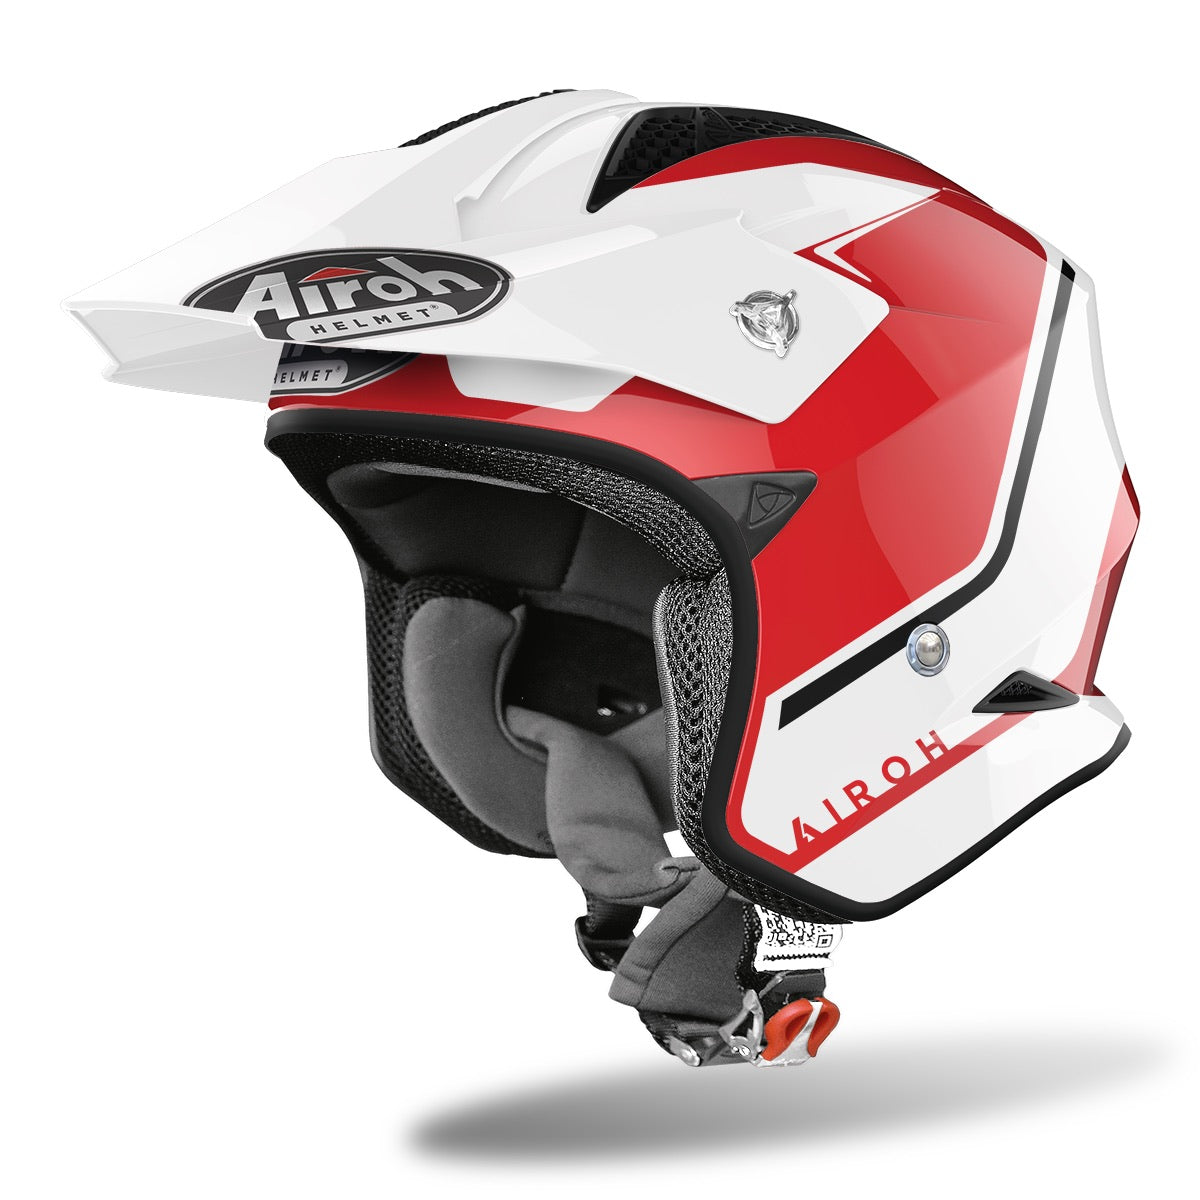 AIROH TRR S CASCO MOTO JET TRRSK55 KEEN ROSSO LUCIDO XS 